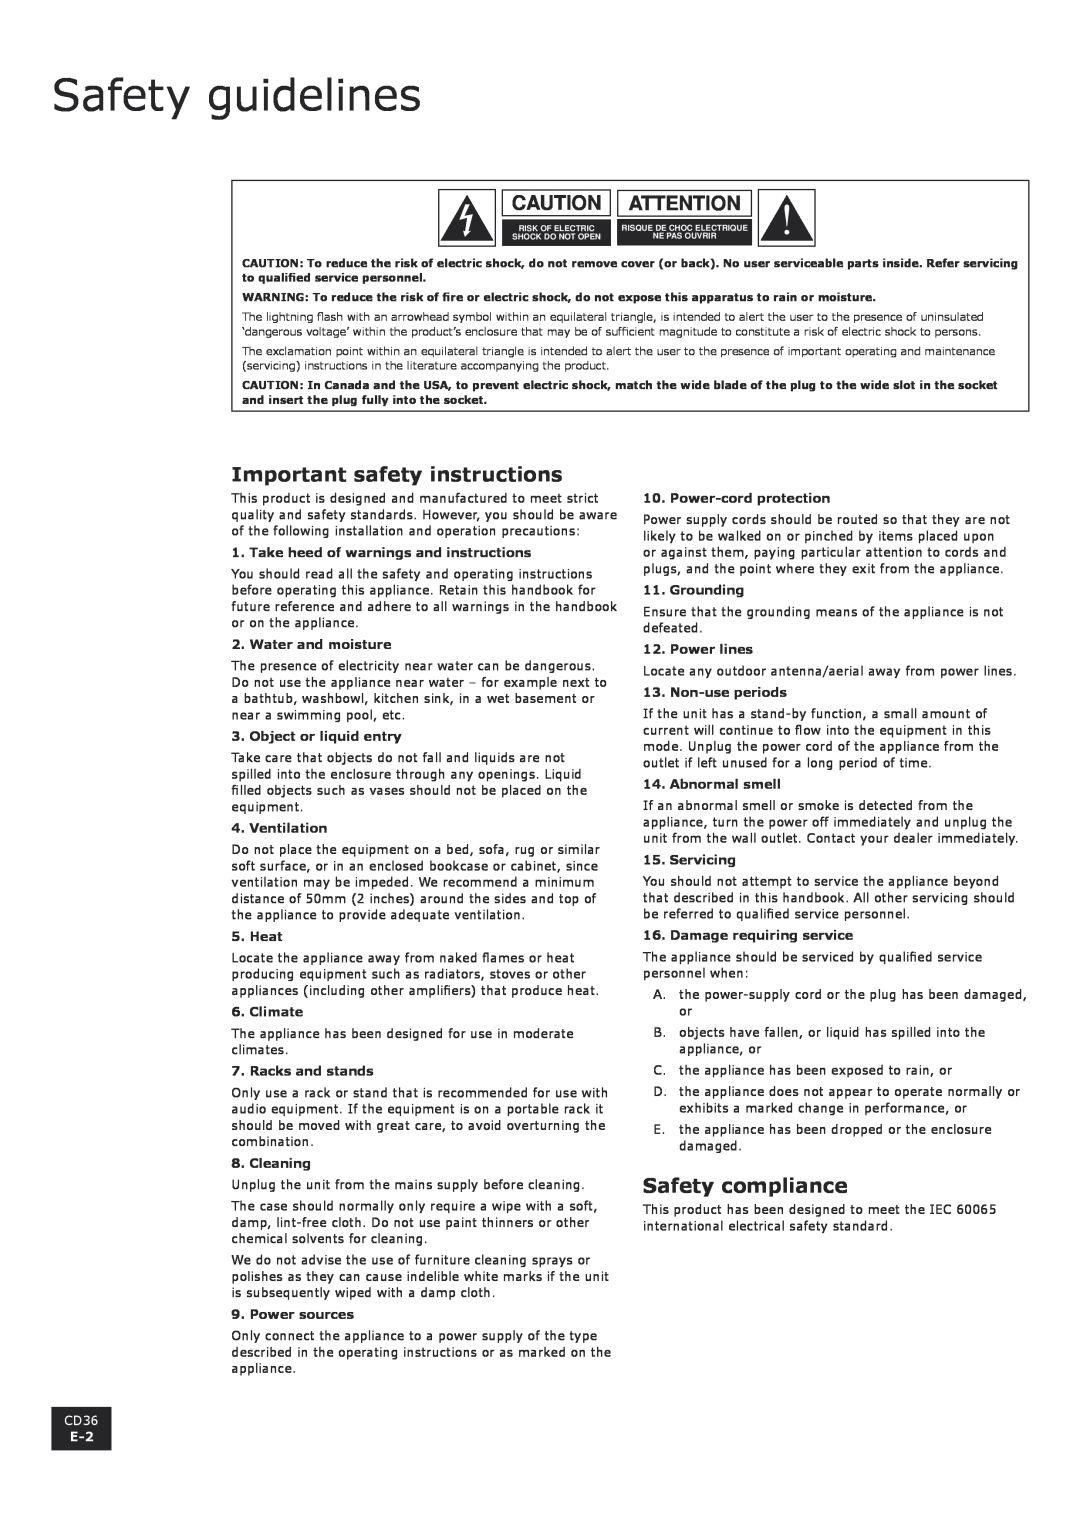 Arcam CD36 manual Safety guidelines, Important safety instructions, Safety compliance, Caution Attention 